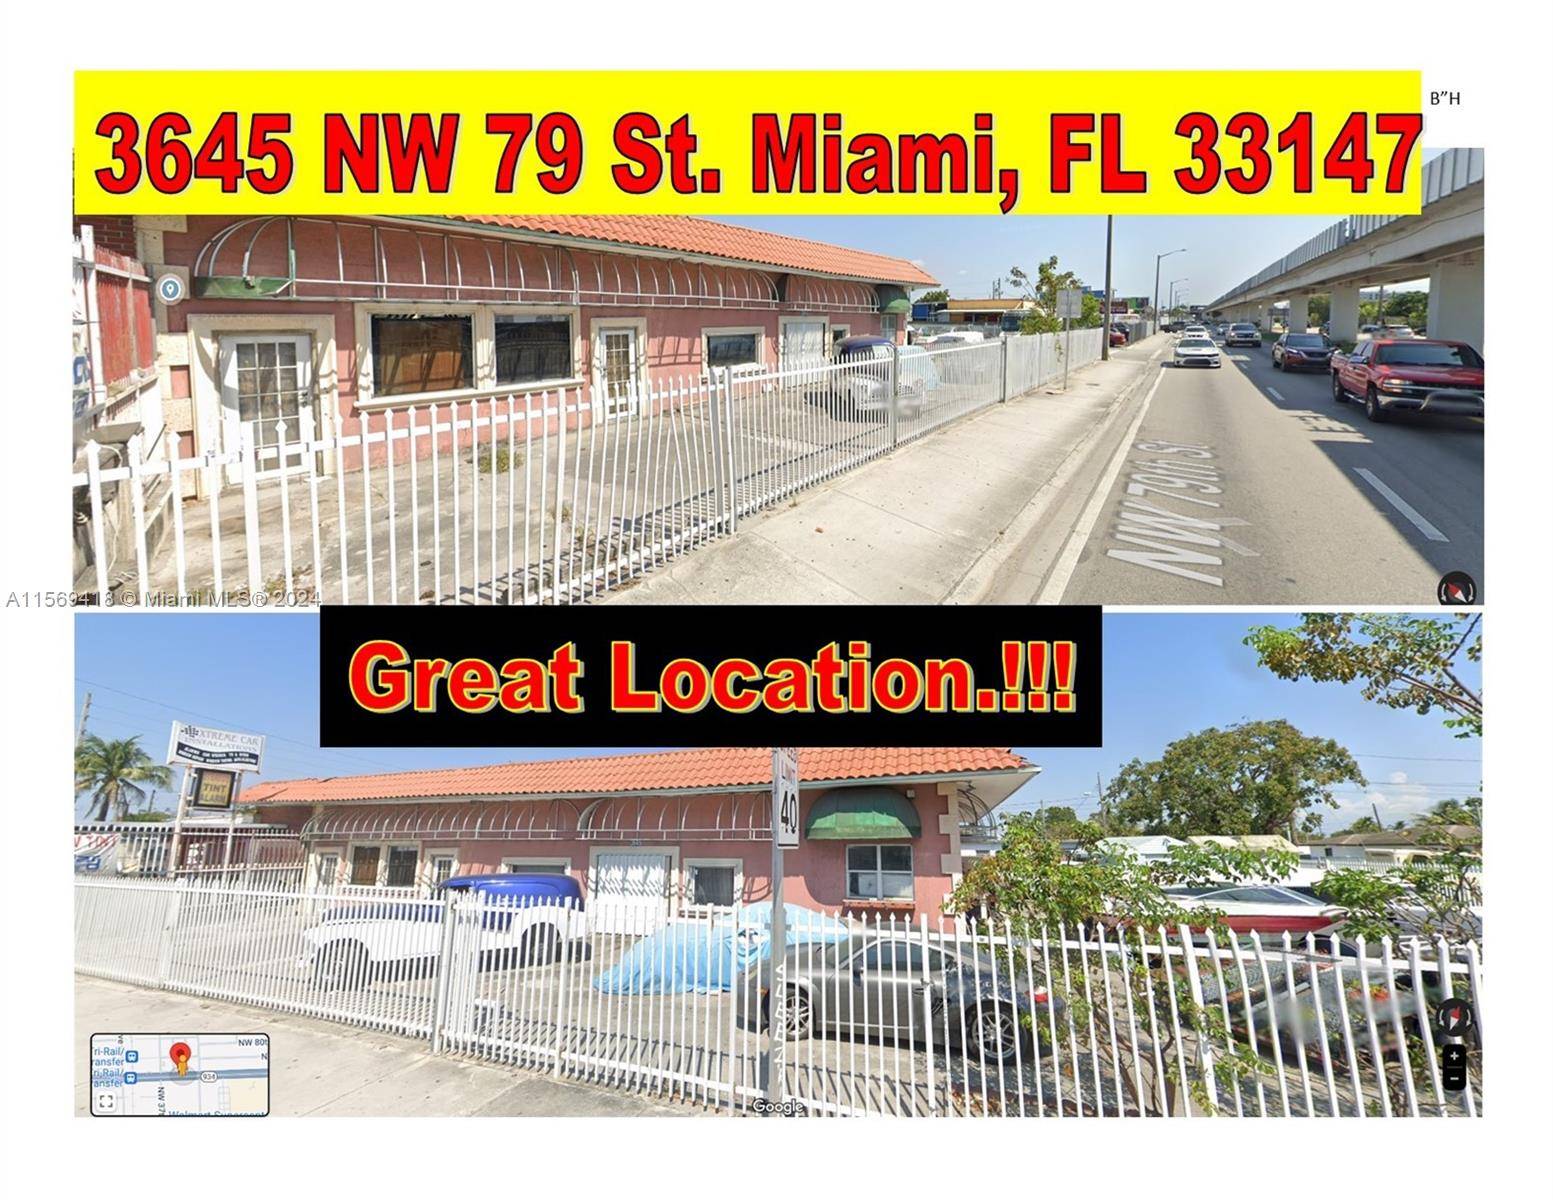 Location, Location, Location in NW 79 Street Redevelopment Opportunity, 12 Story Building Height Maximum Zoning Industrial Frontage in NW 79 Street approximately 125 Feet and approximately 86 Feet Depth in ...